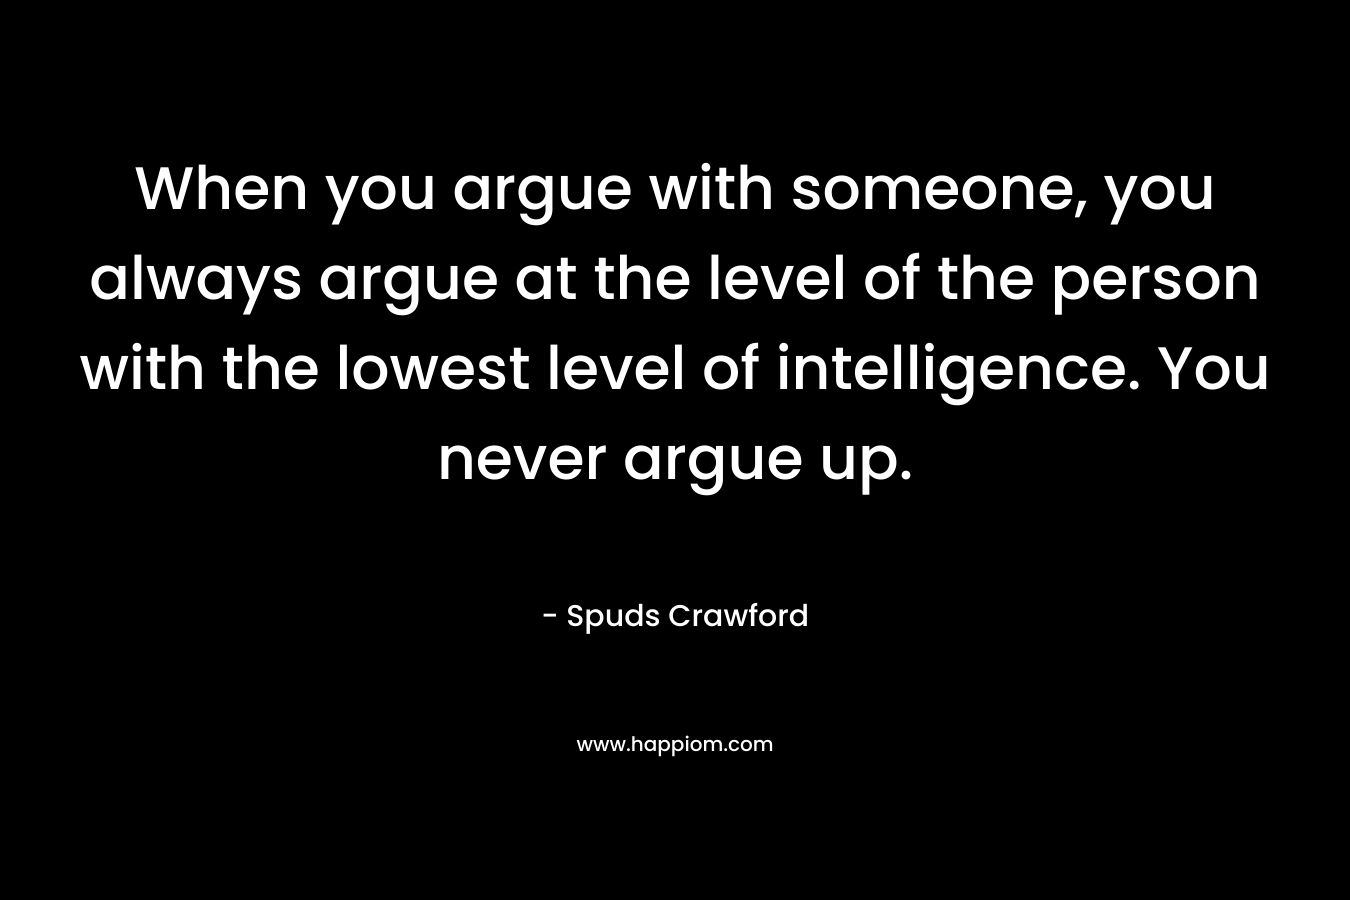 When you argue with someone, you always argue at the level of the person with the lowest level of intelligence. You never argue up. – Spuds Crawford